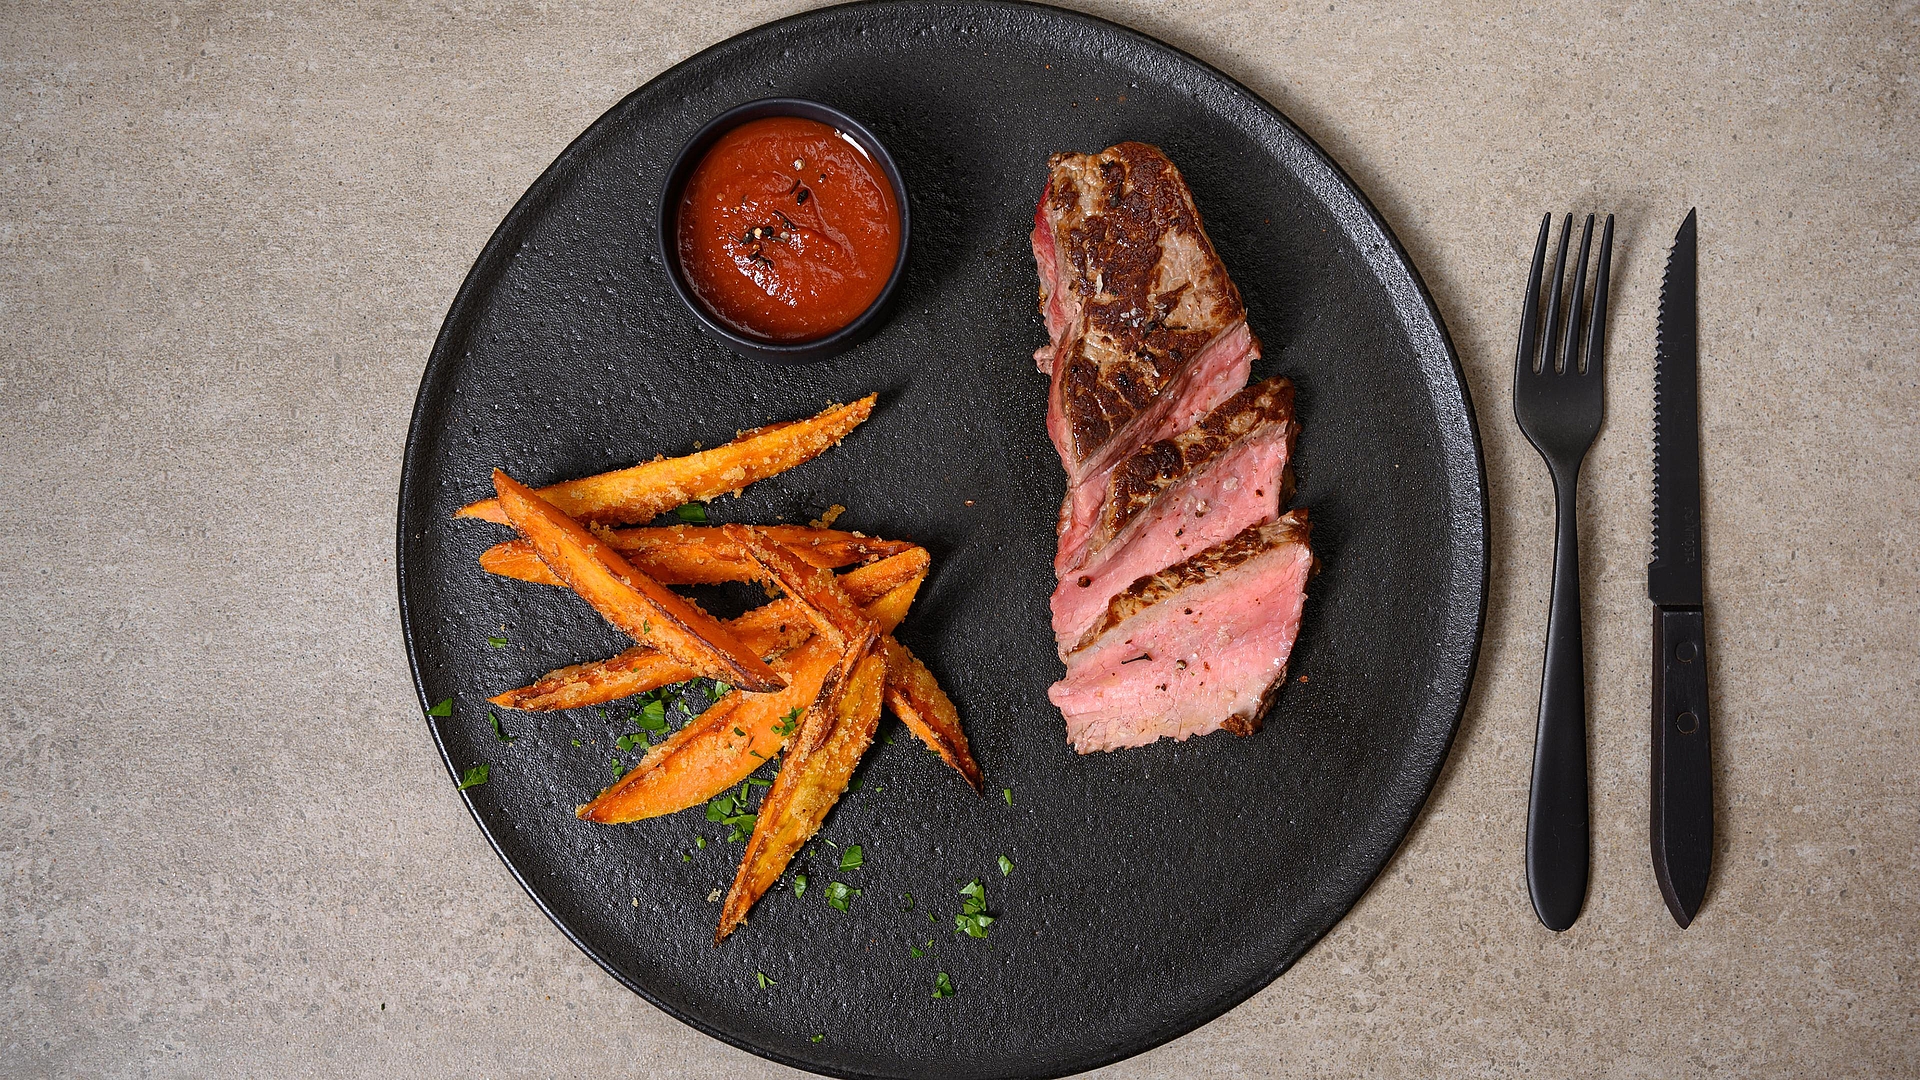 Steak and sweet potato fries with healthy barbecue sauce